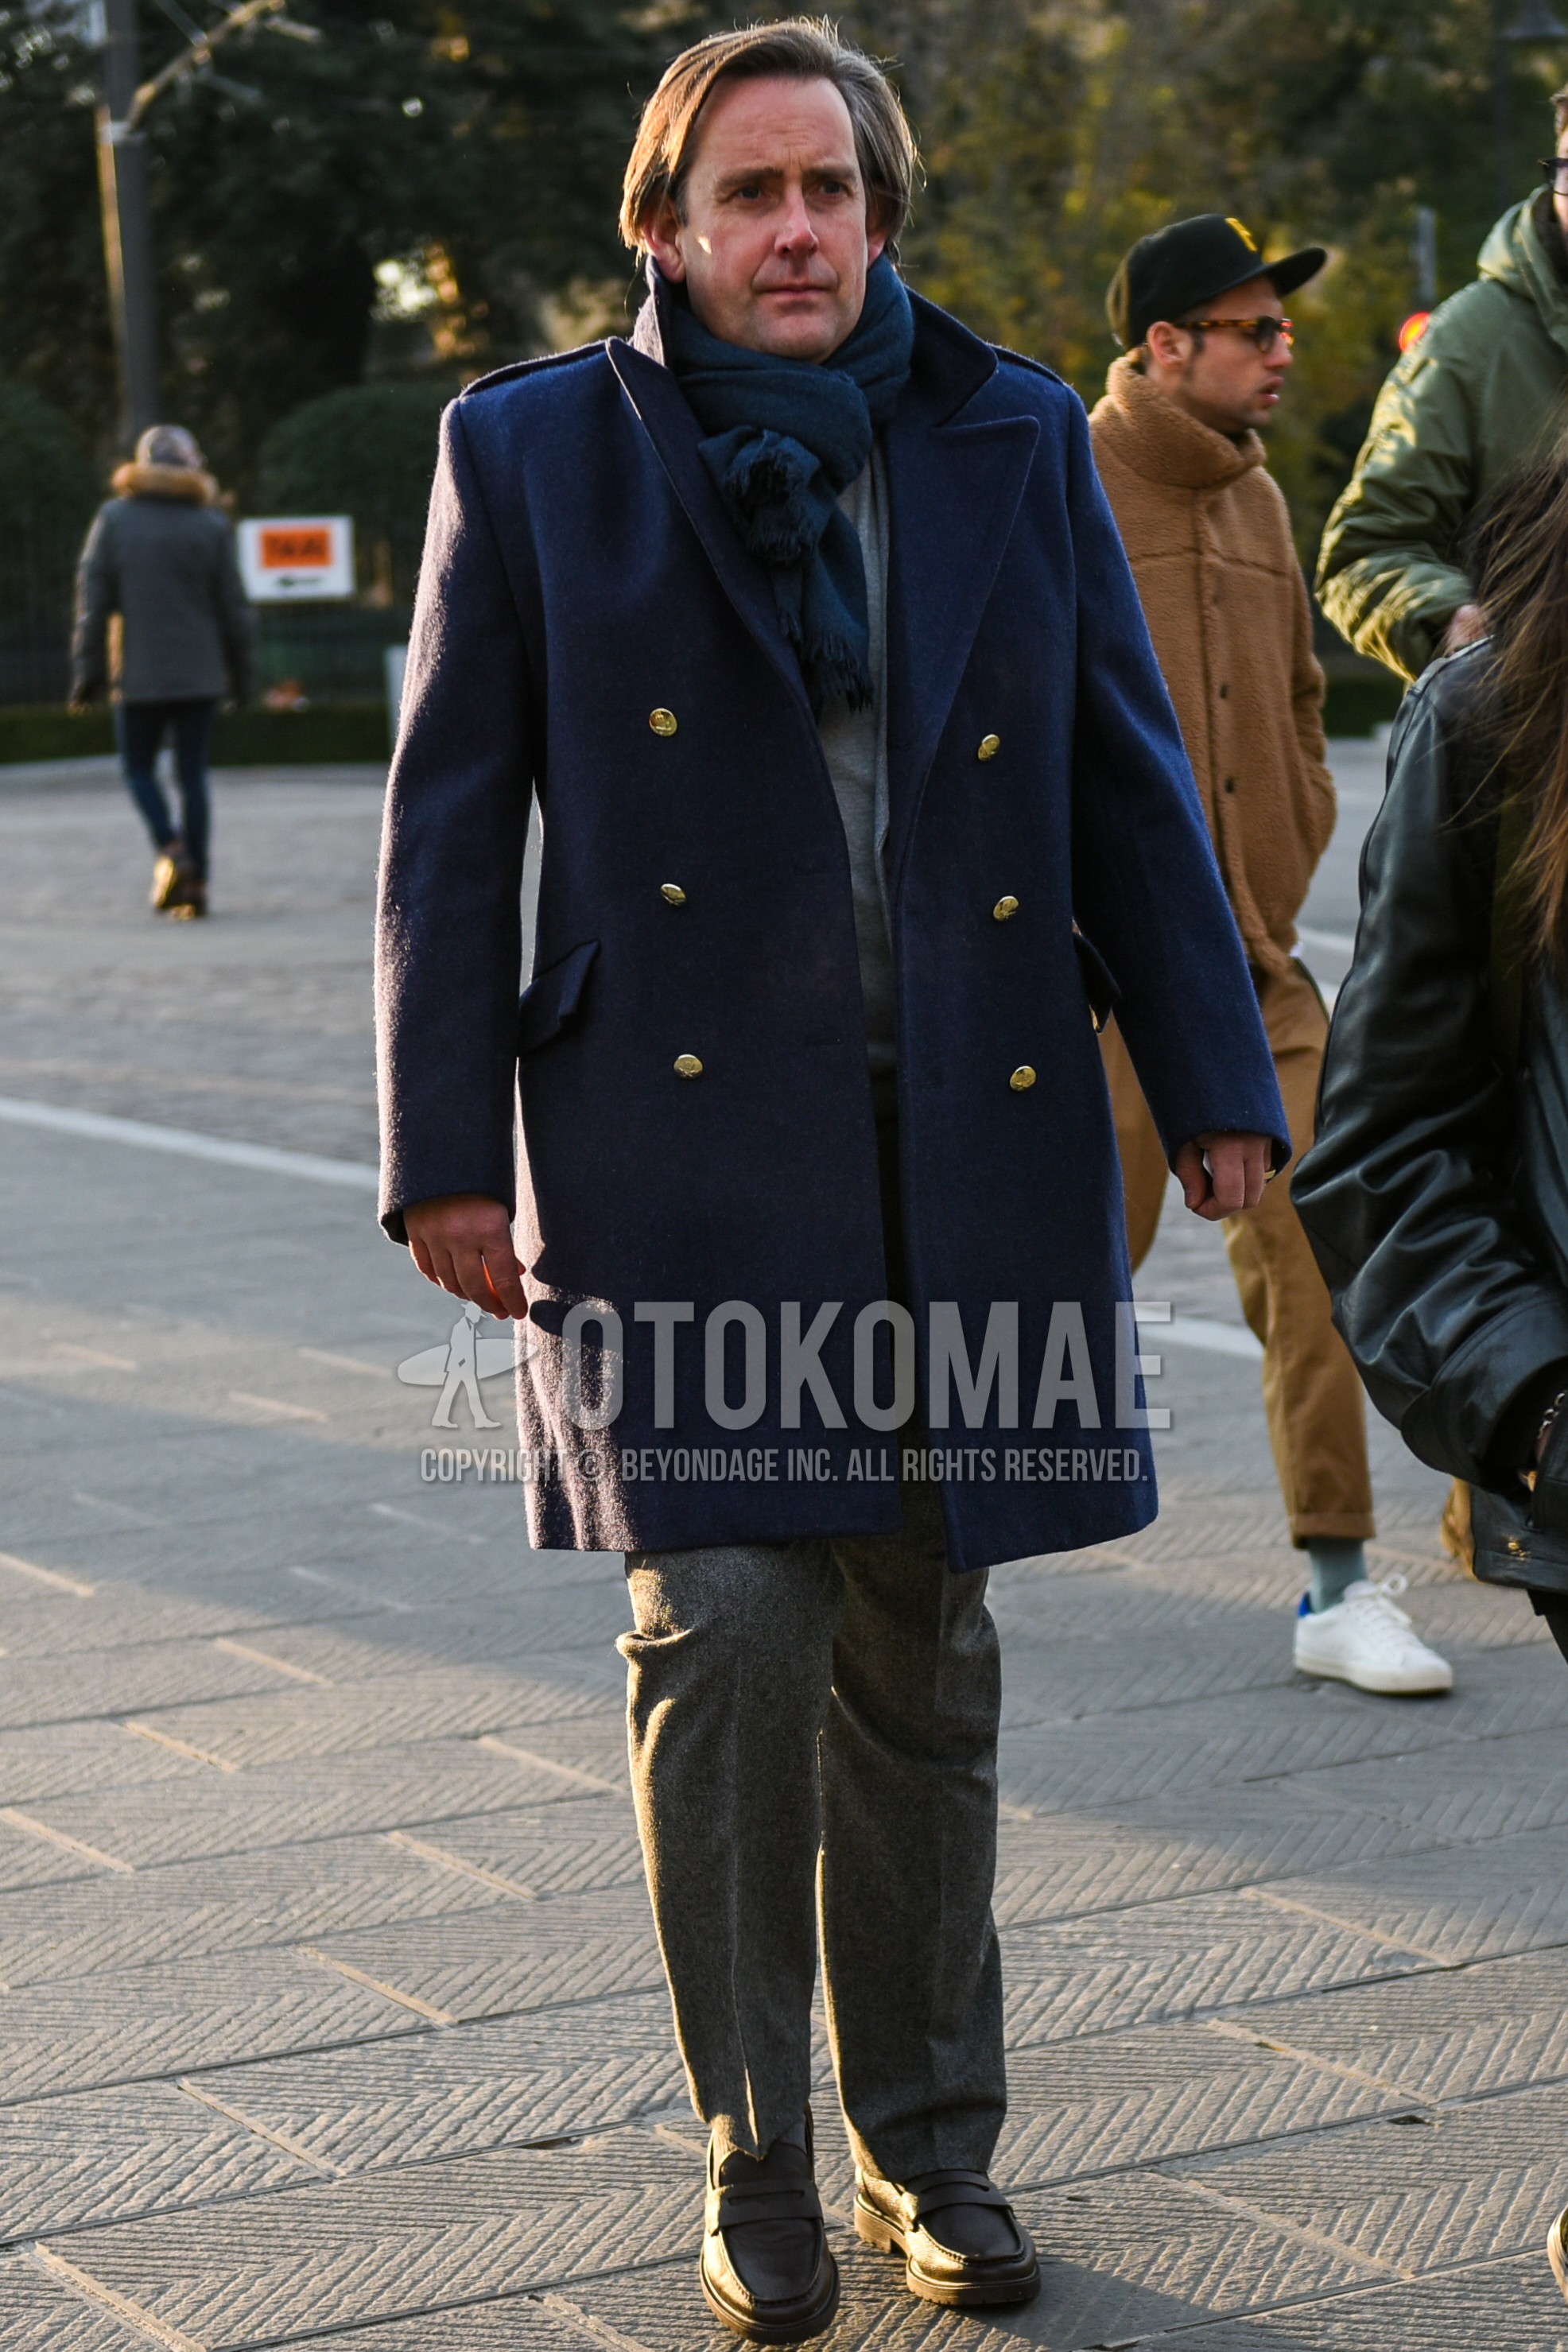 Men's autumn winter outfit with navy plain scarf, navy plain chester coat, gray plain slacks, black coin loafers leather shoes.